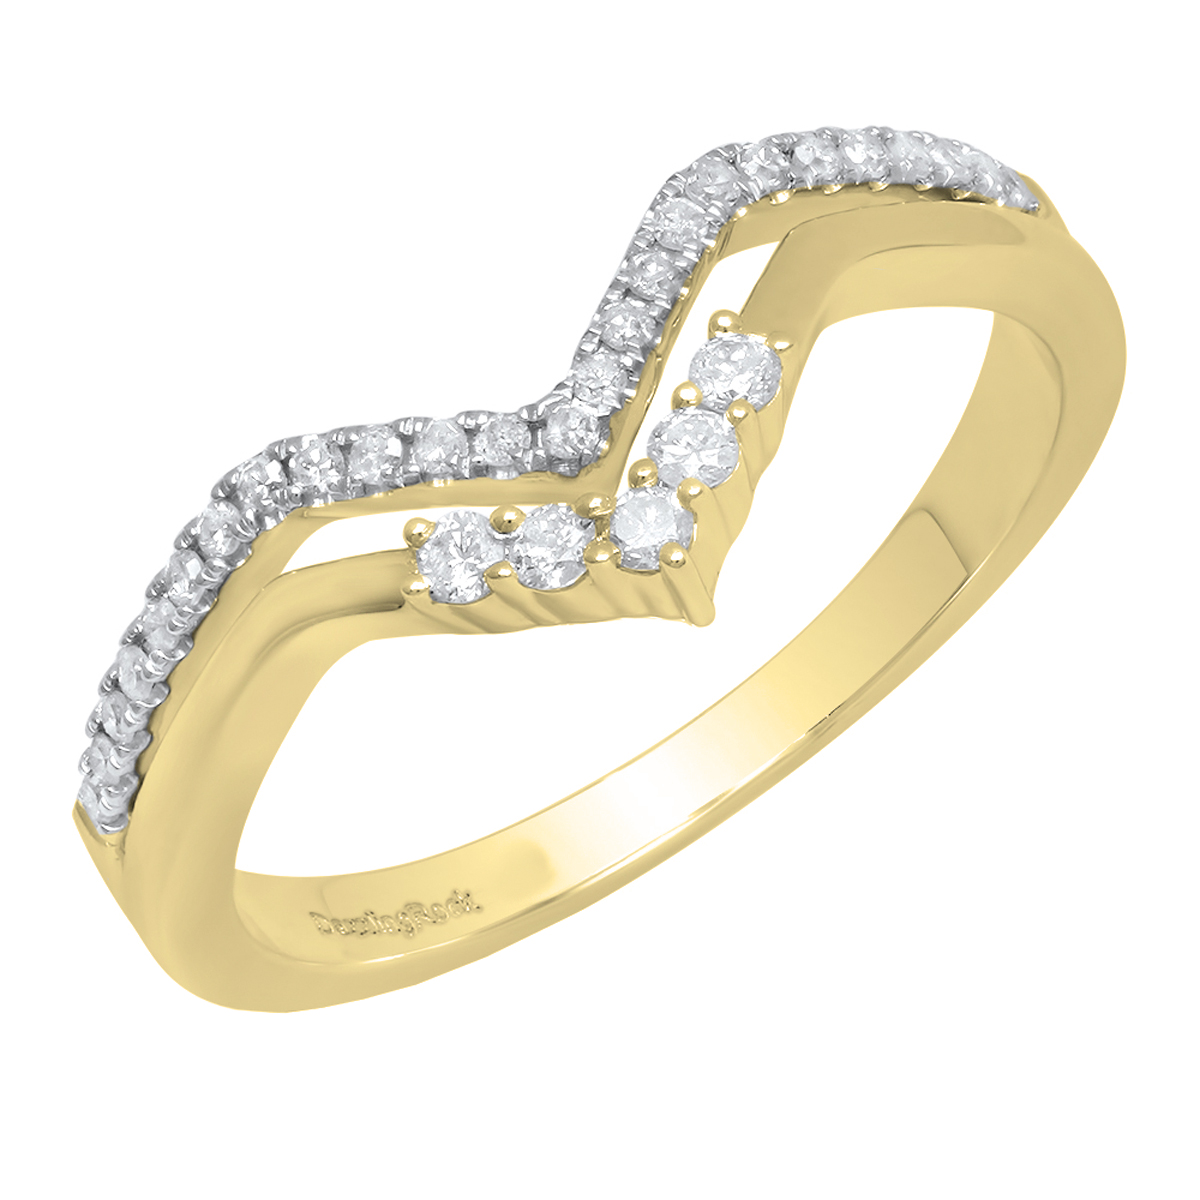 Chevron Ring with 0.25 Carat TW of Diamonds in 10kt Yellow Gold